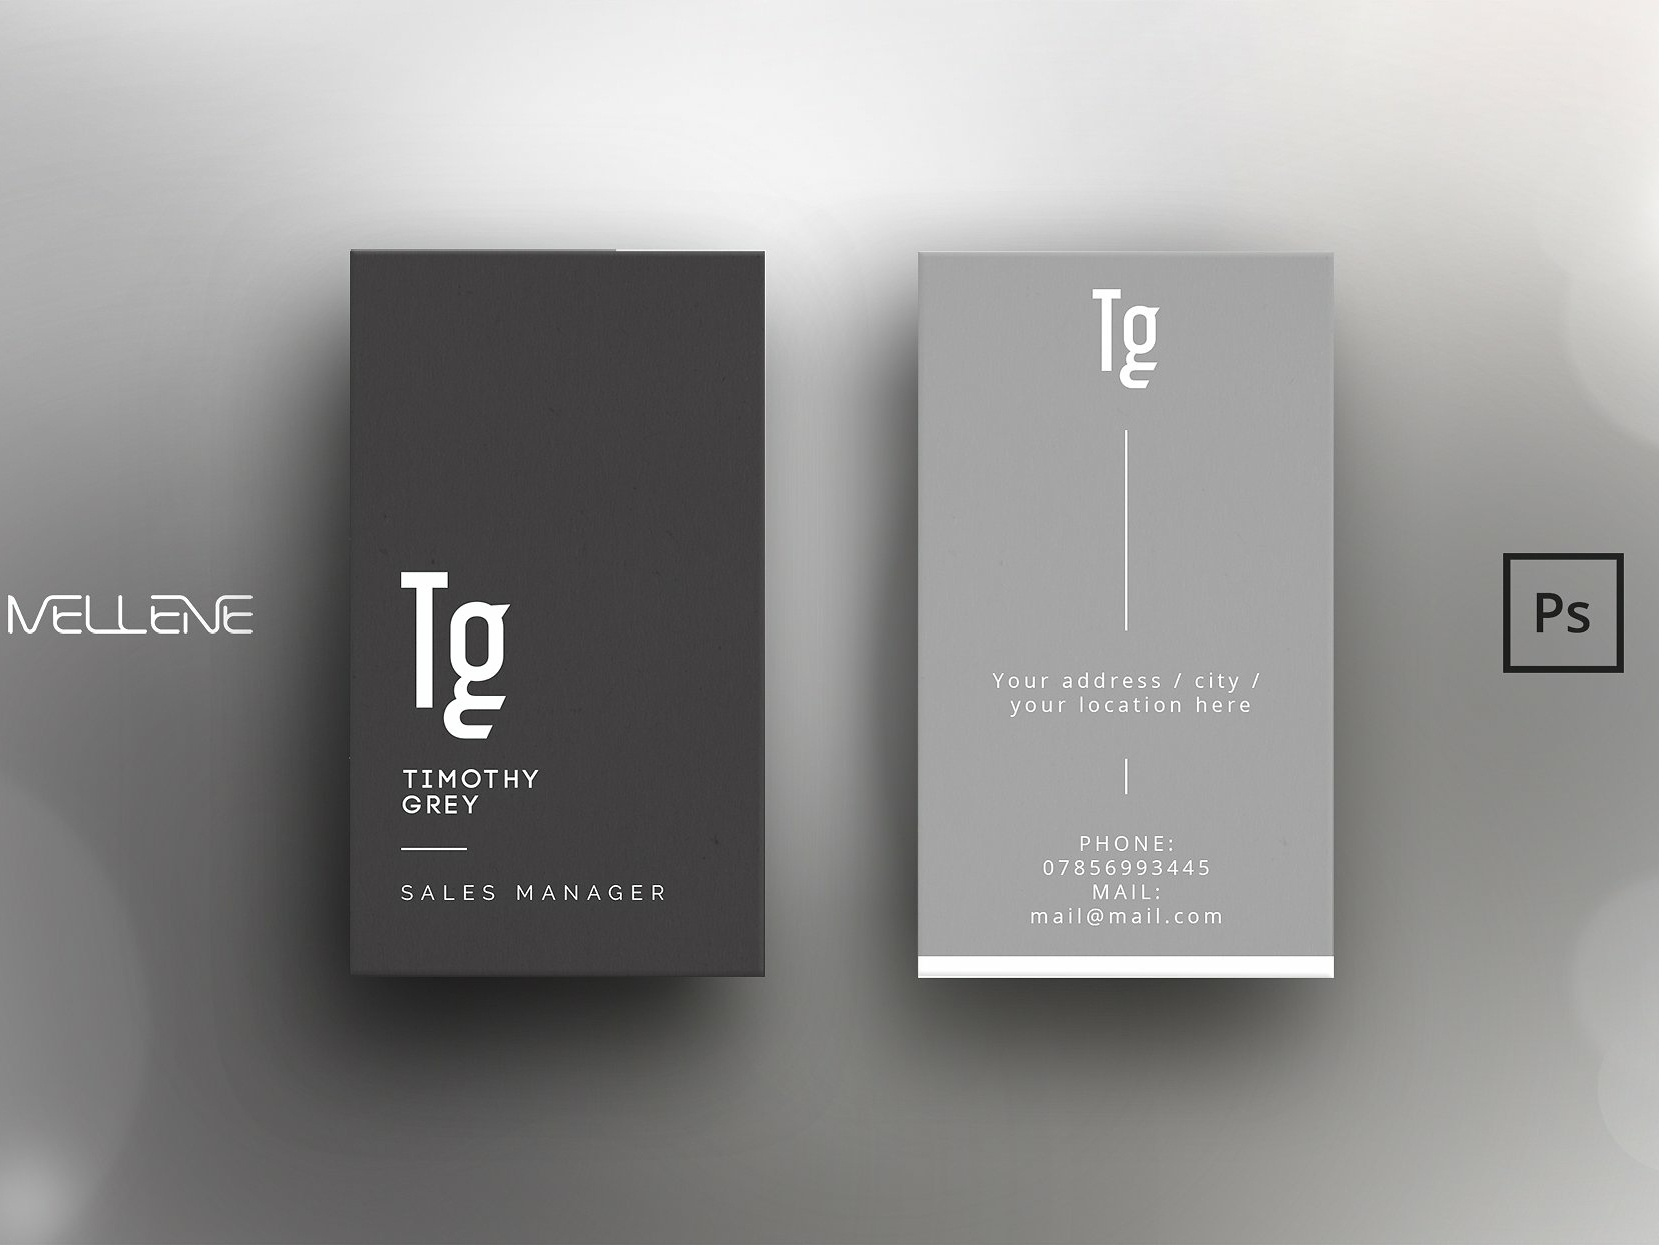 Business Card Template For Photoshopbusiness Cards On Pertaining To Visiting Card Templates For Photoshop